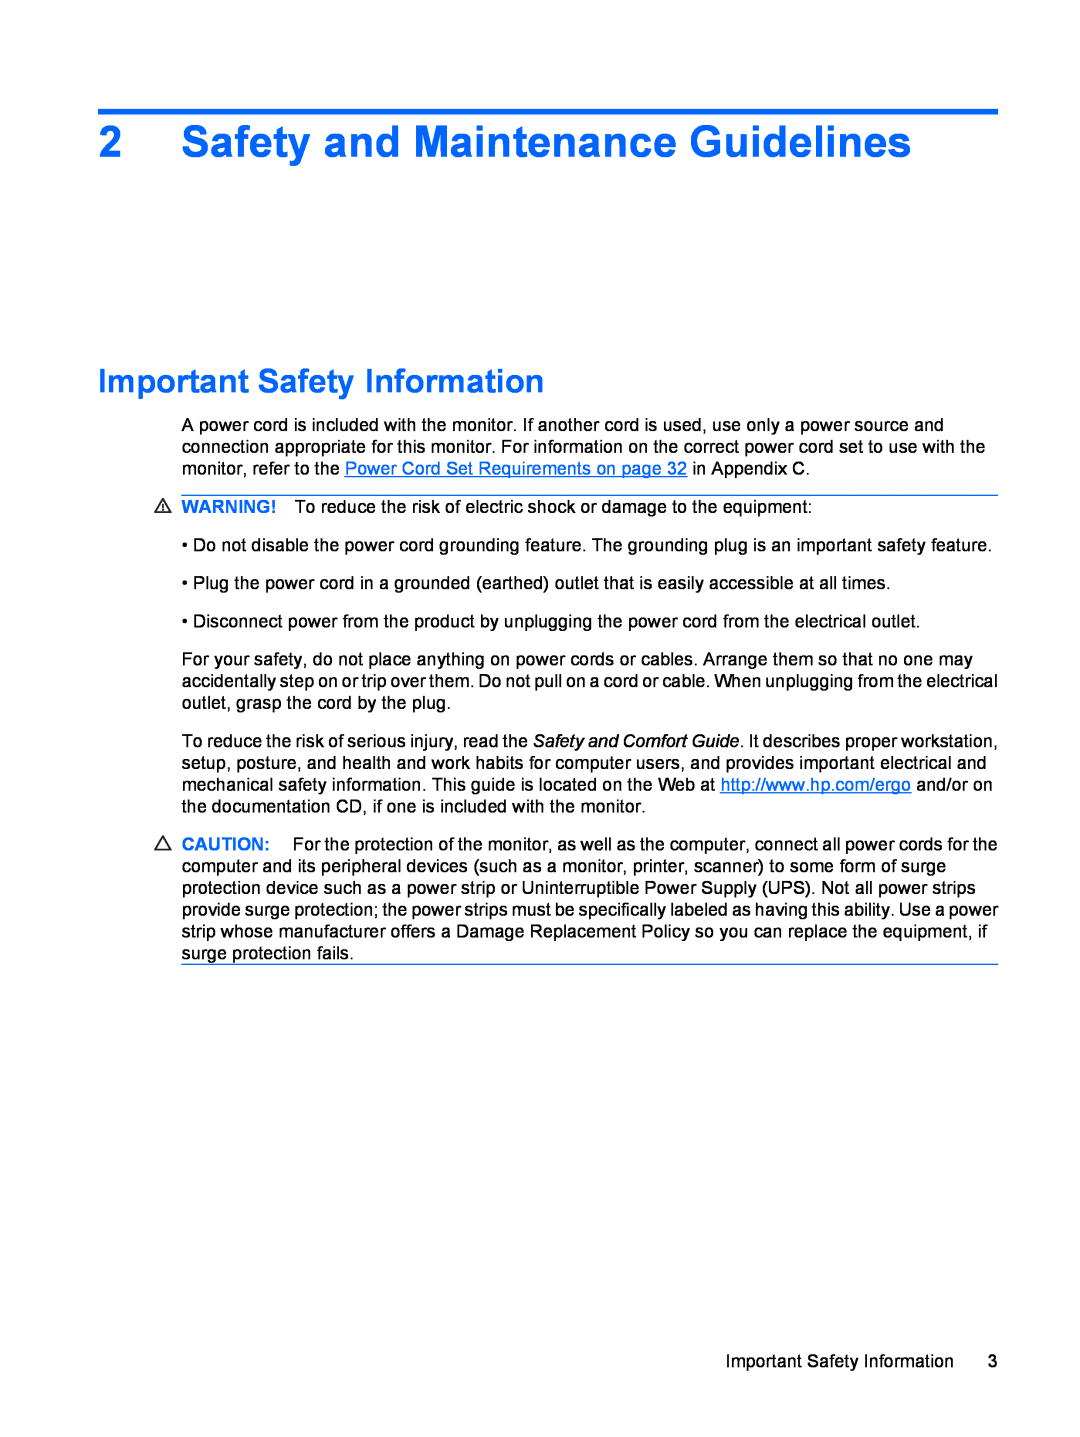 HP LE1711 17-inch manual Safety and Maintenance Guidelines, Important Safety Information 